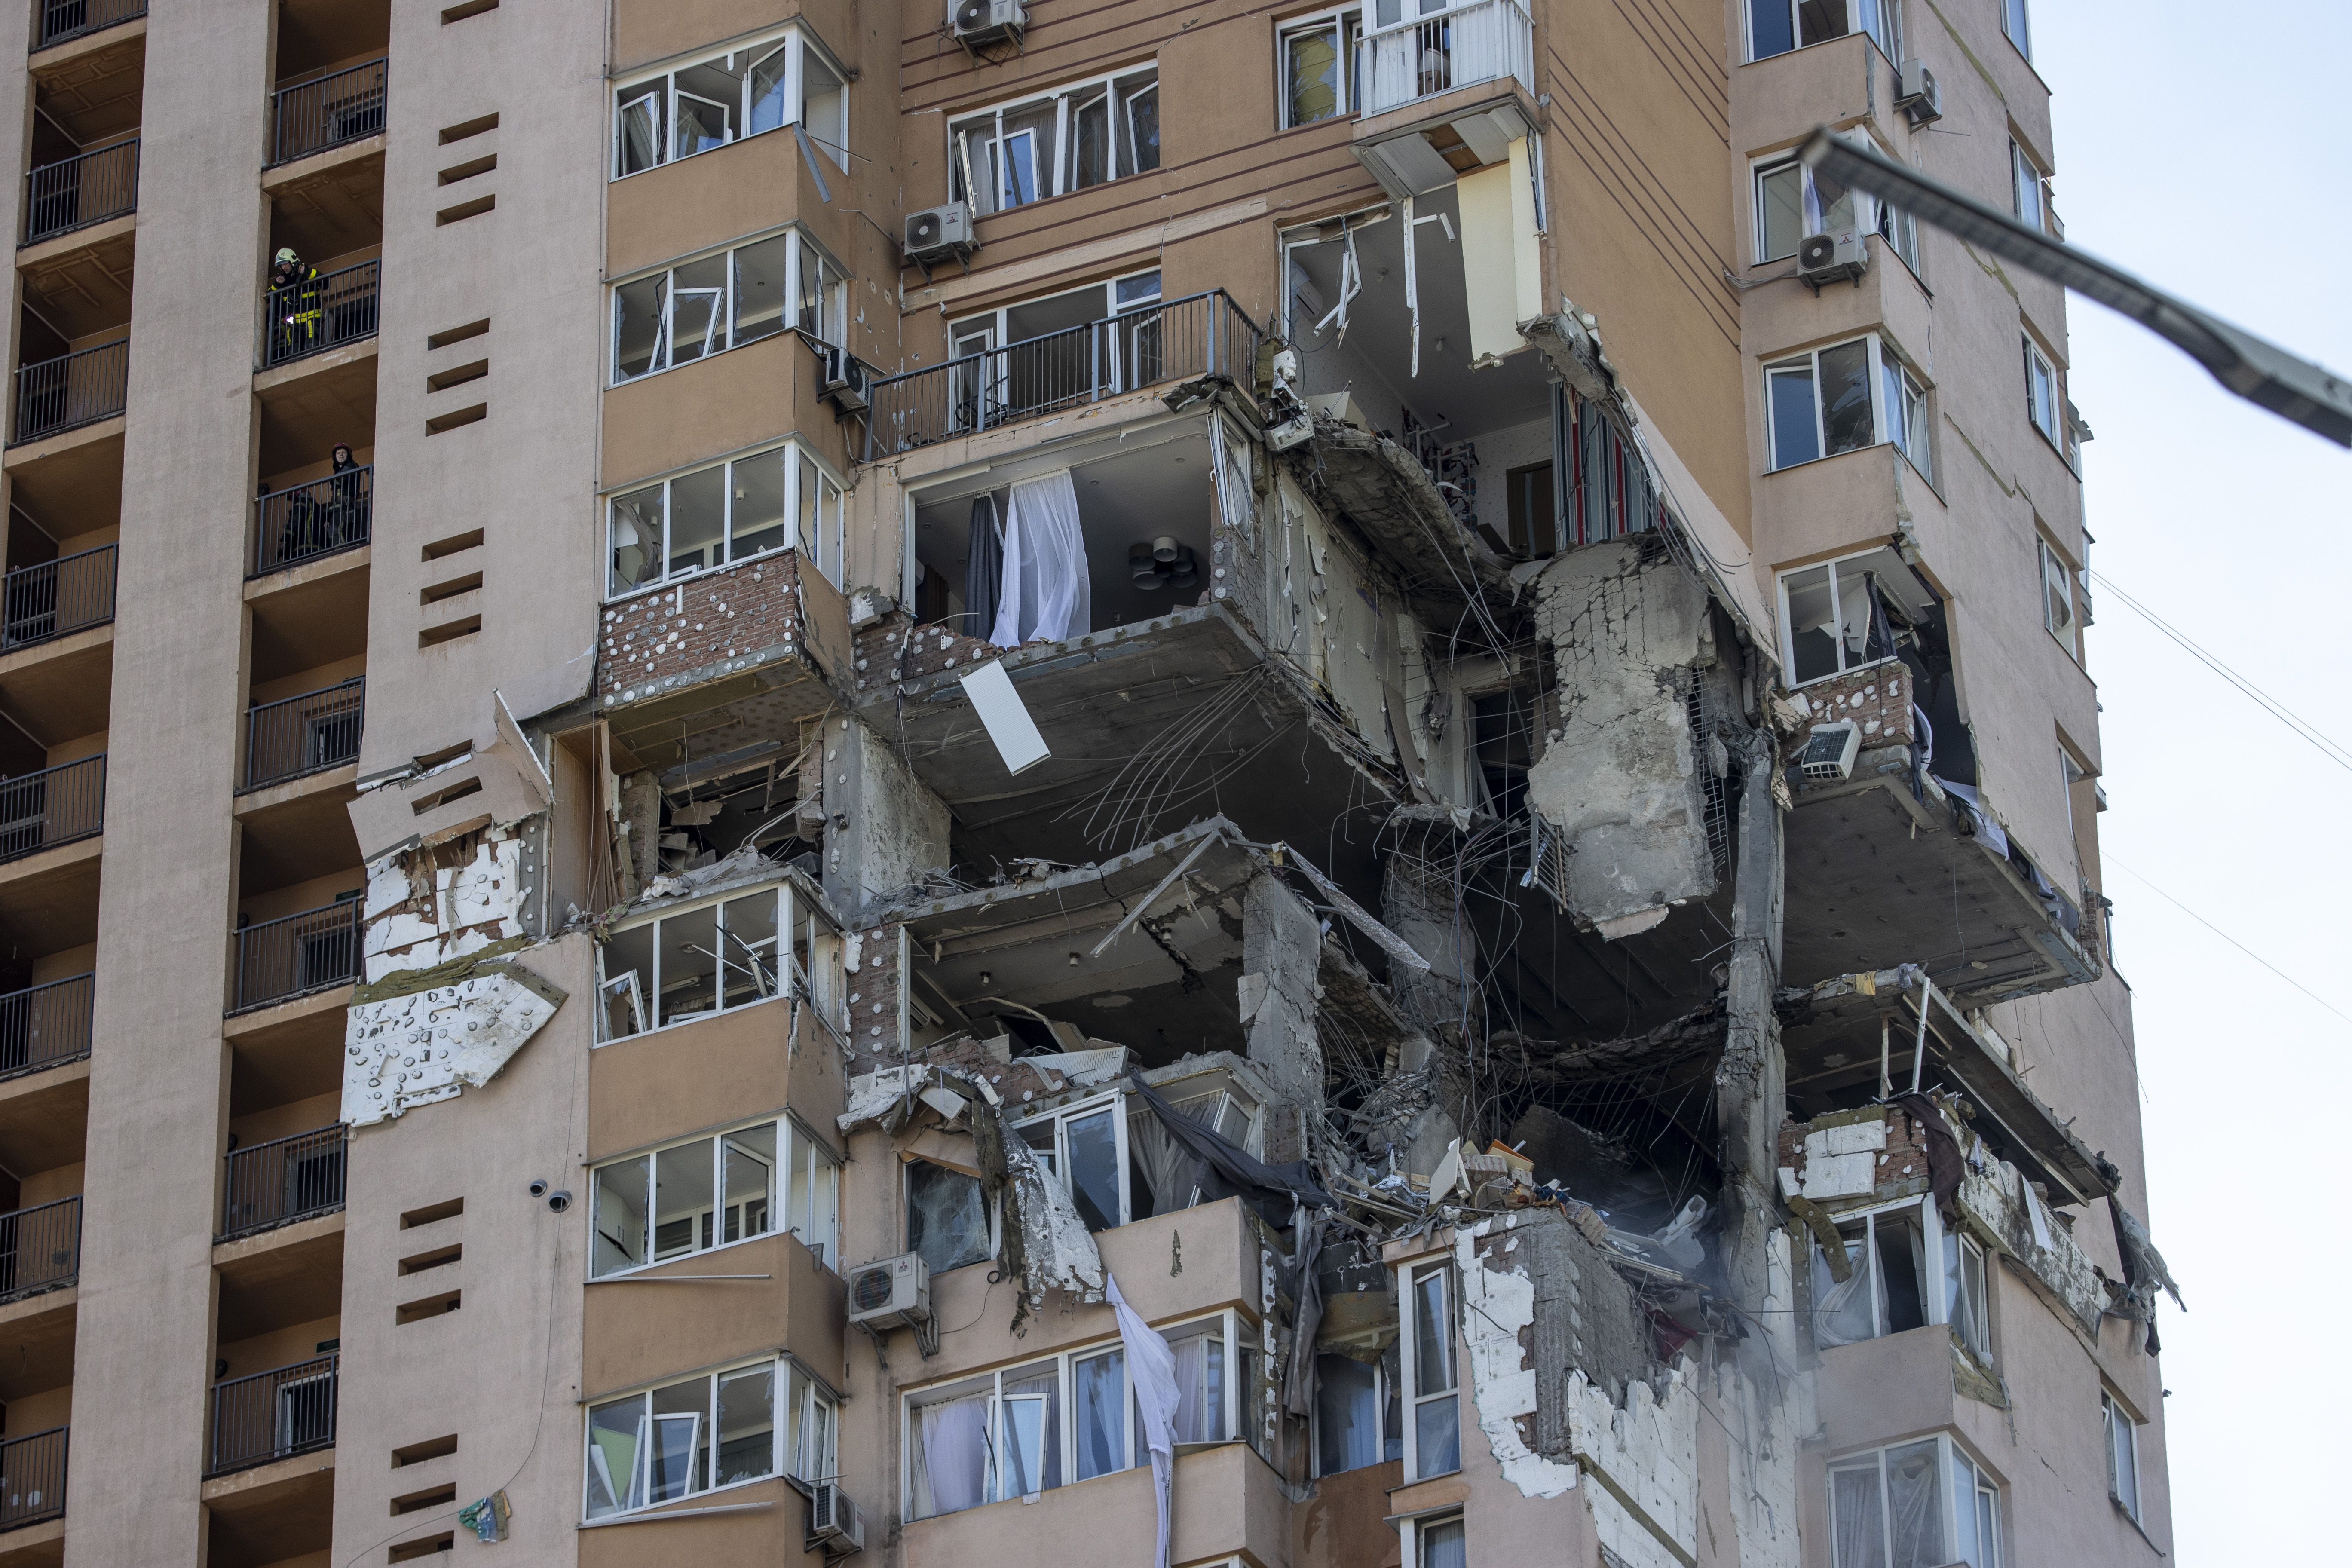 A damaged building in Kyiv that was hit by a recent shelling by Russian forces. Photo: Aytac Unal/Anadolu Agency via Getty Images)